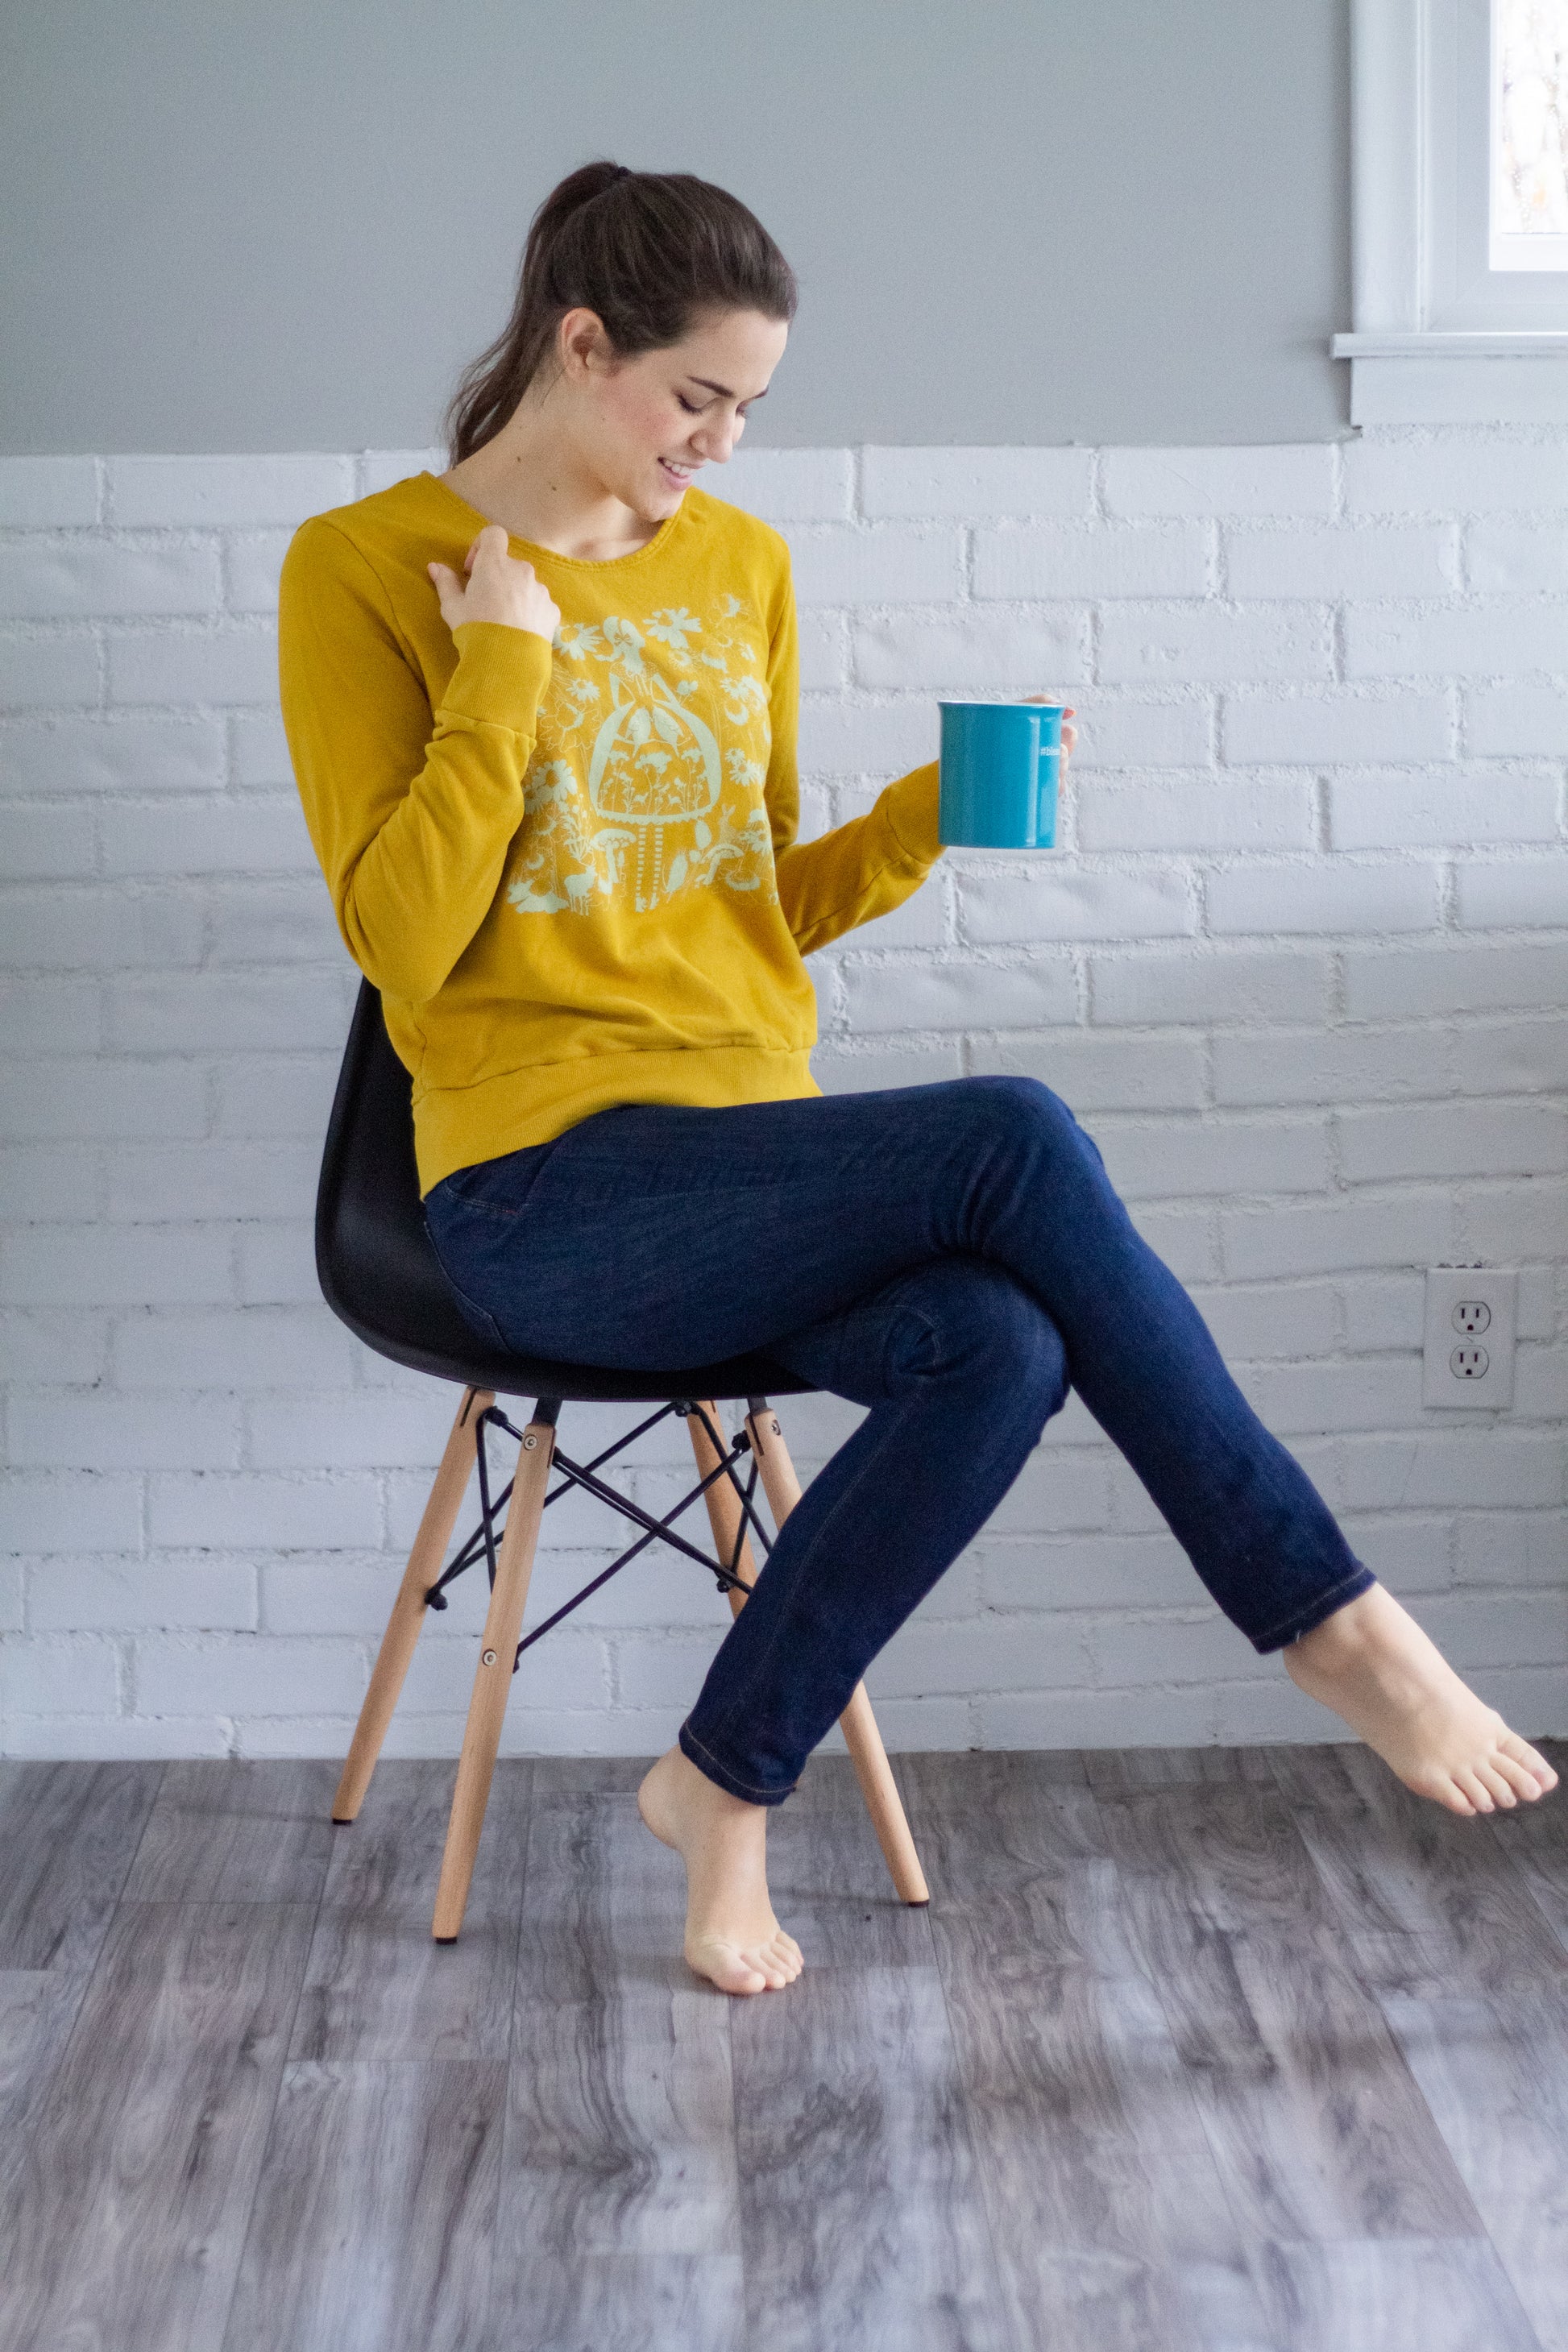 Model seated with coffee mug wearing sweatshirt with white screen print of cute girl surrounded by flora and fauna